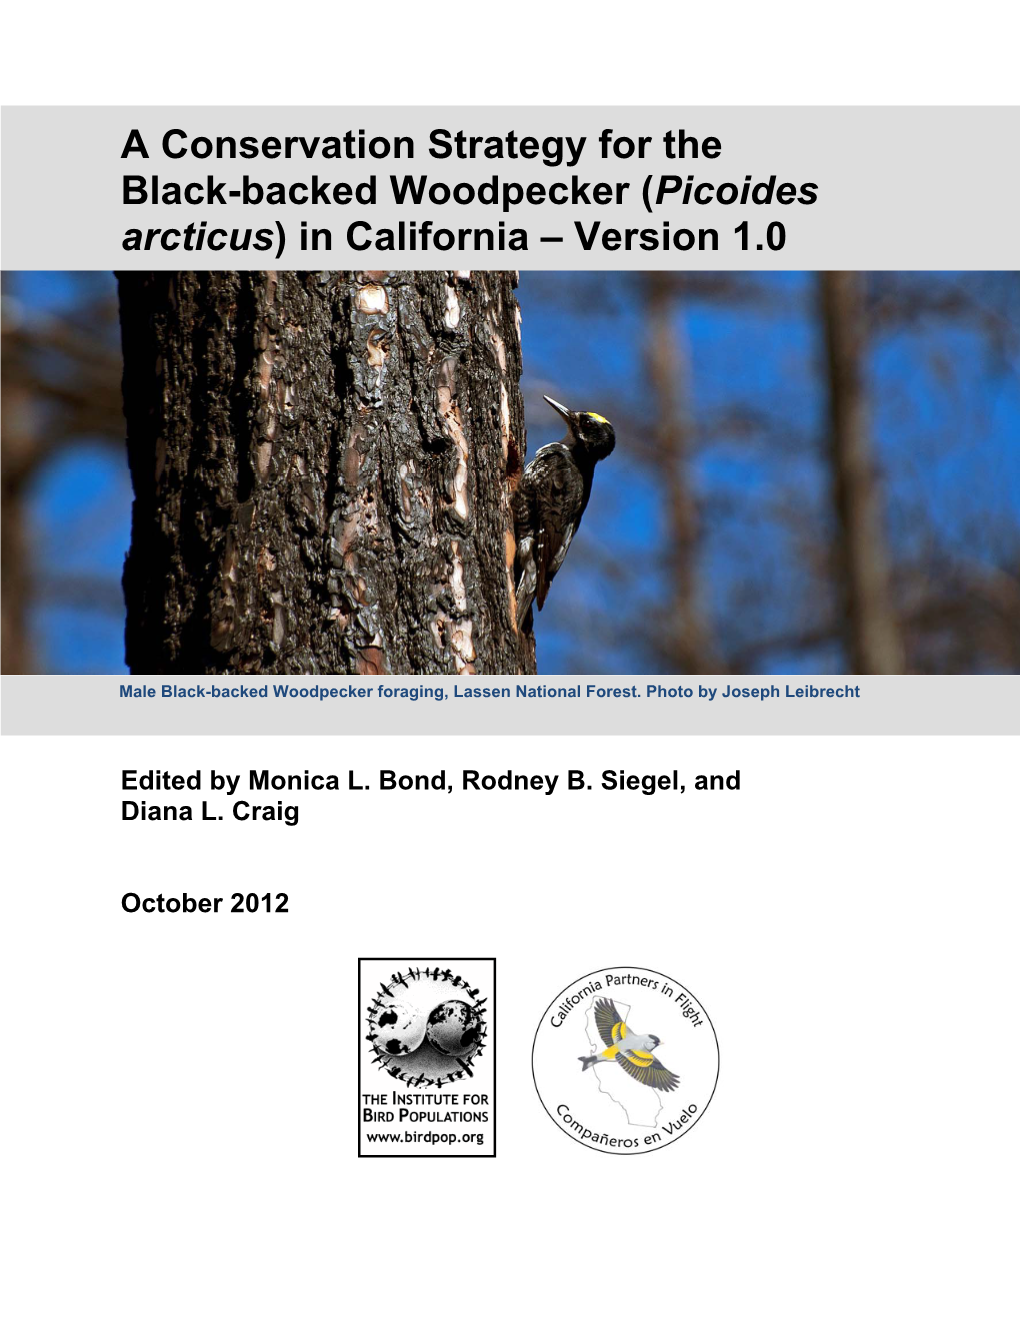 A Conservation Strategy for the Black-Backed Woodpecker (Picoides Arcticus) in California – Version 1.0